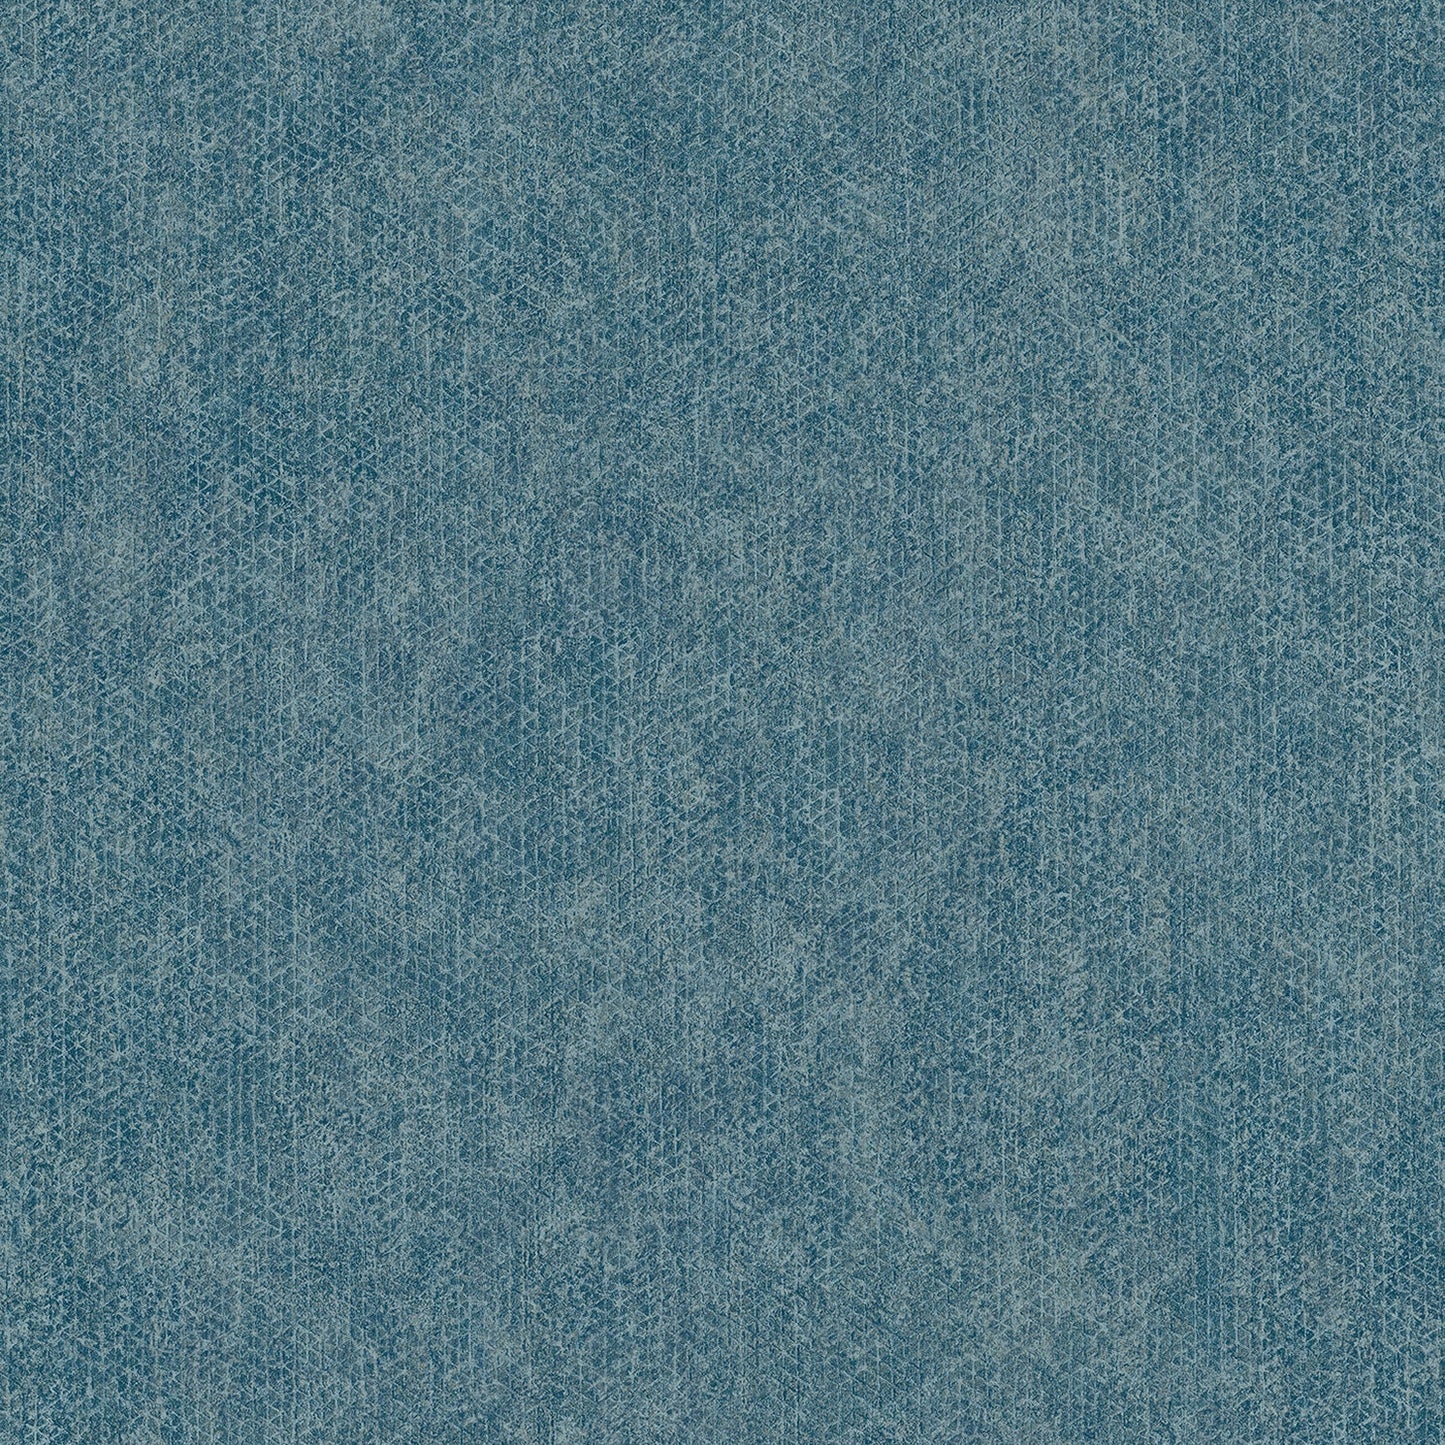 Shop 4020-75311 Geo & Textures Everett Teal Distressed Textural Teal by Advantage